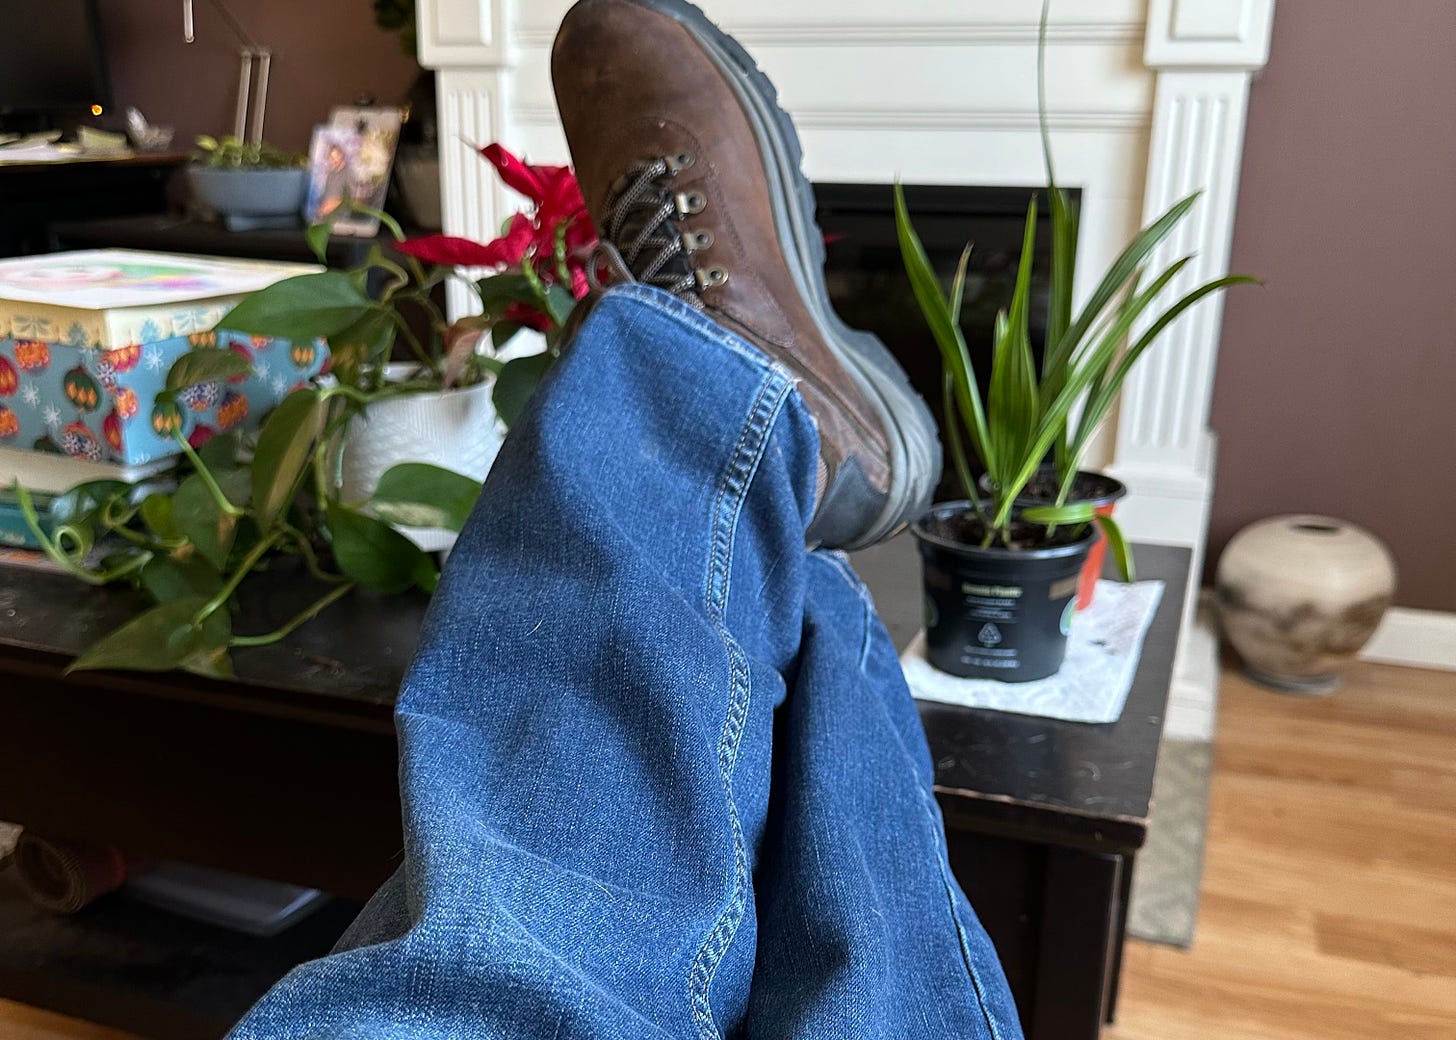 A first person POV of a man in jeans and work boots with his feet up on a coffee table